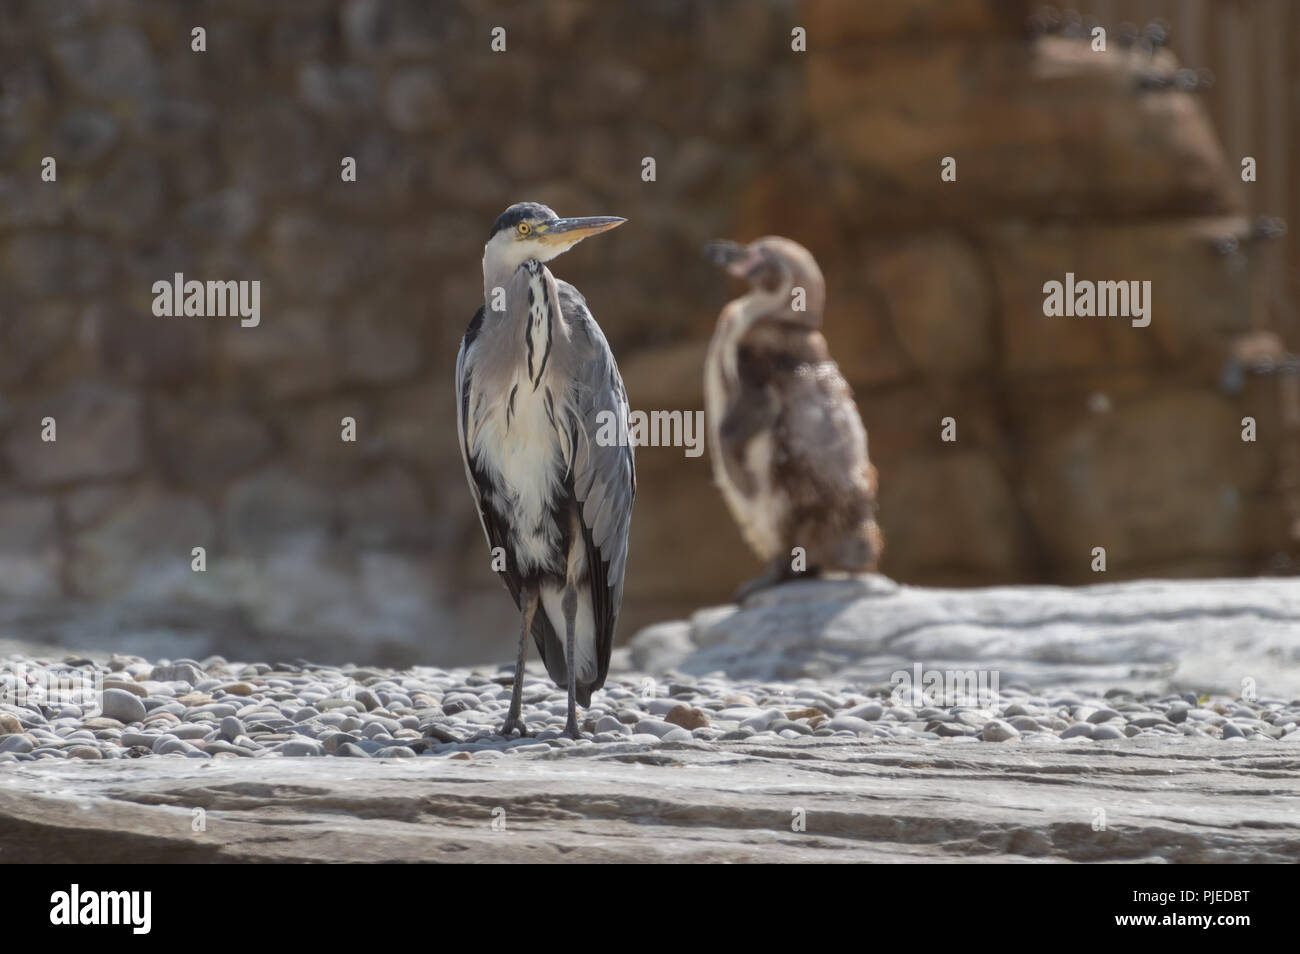 A single Grey Heron has flown in to share the Penguins feeding time at the zoo. Stock Photo